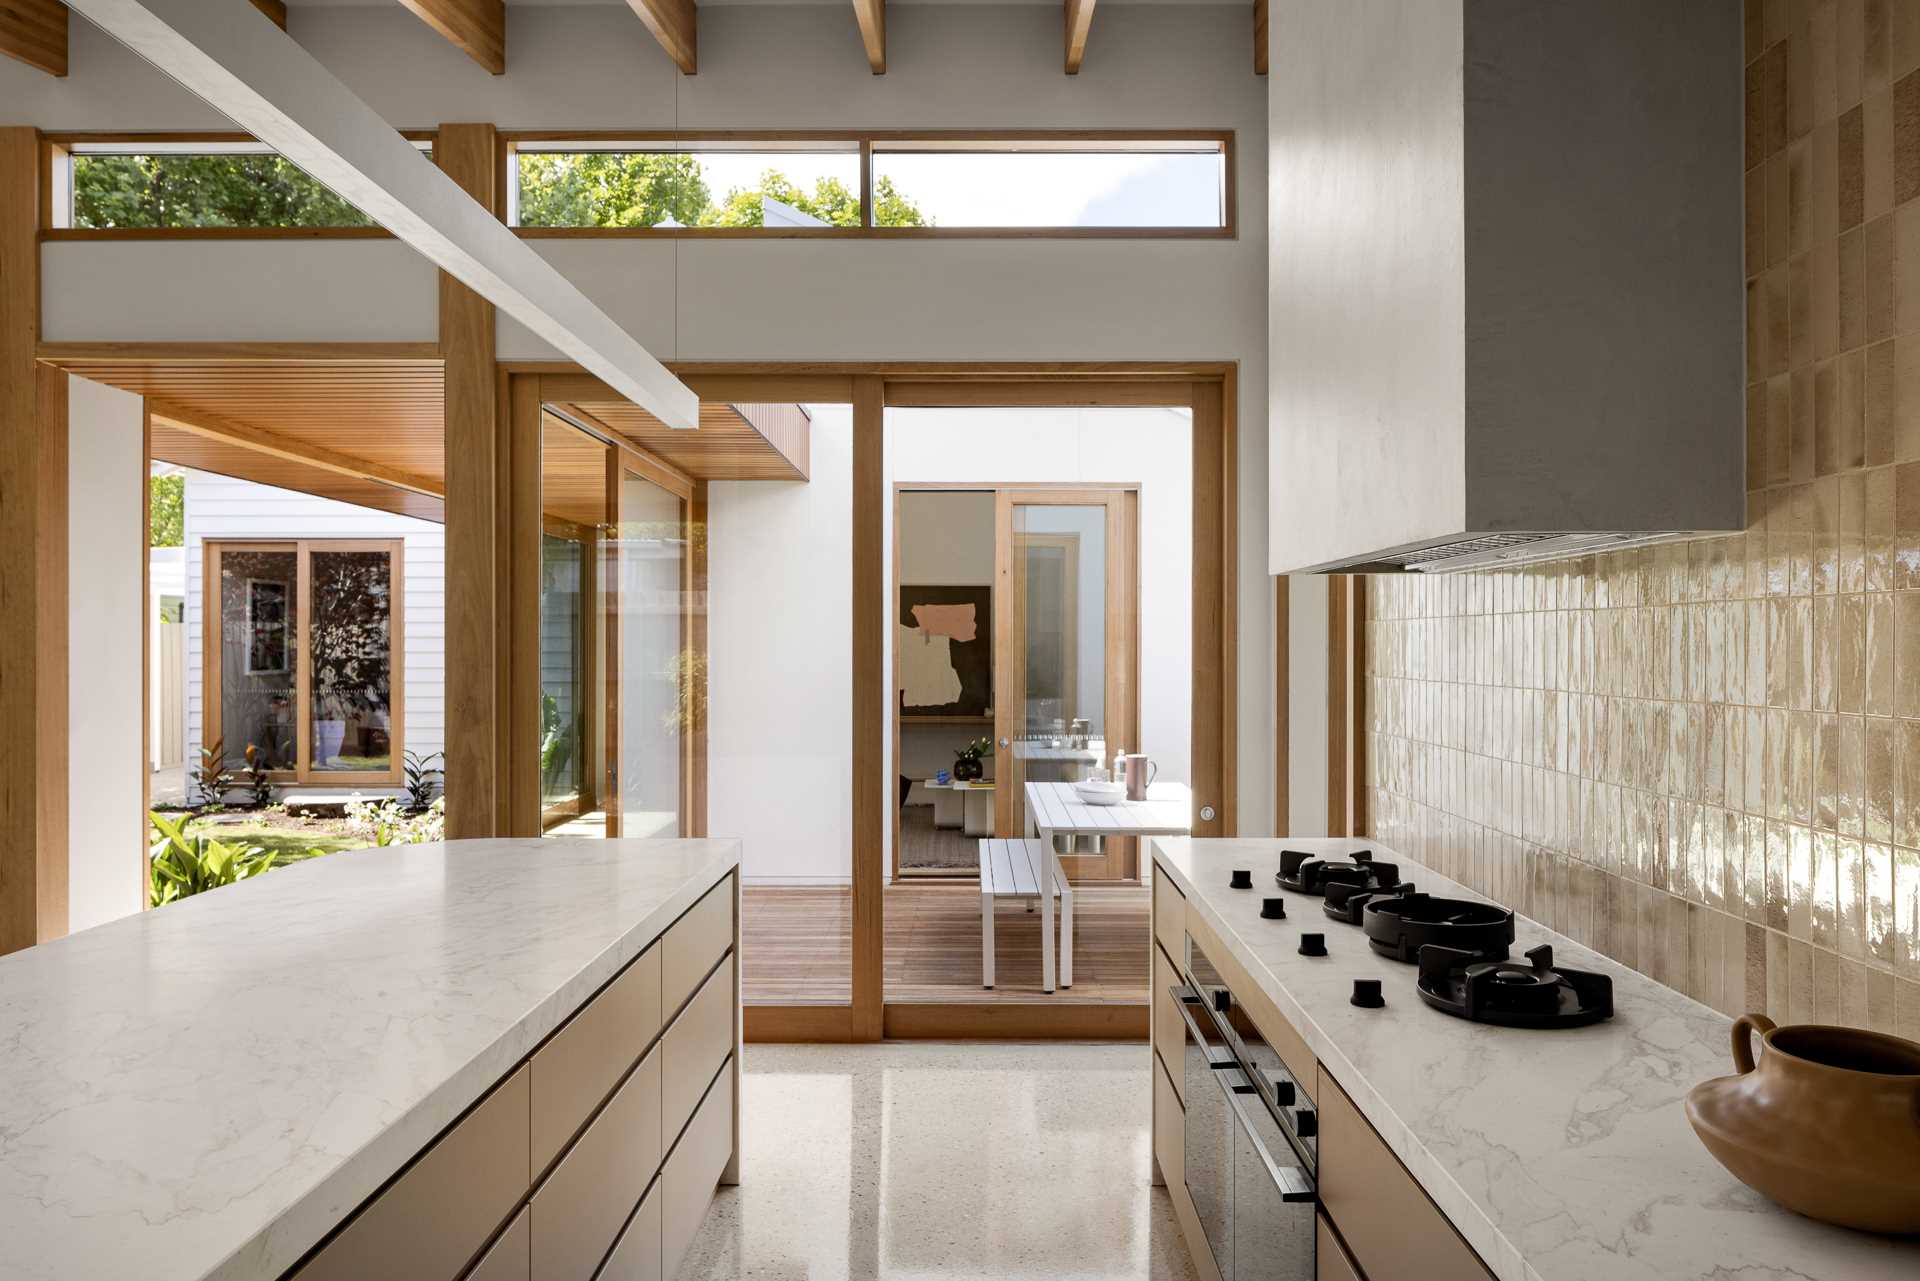 This kitchen has a sliding gl، door that connects to the outdoor dining area.